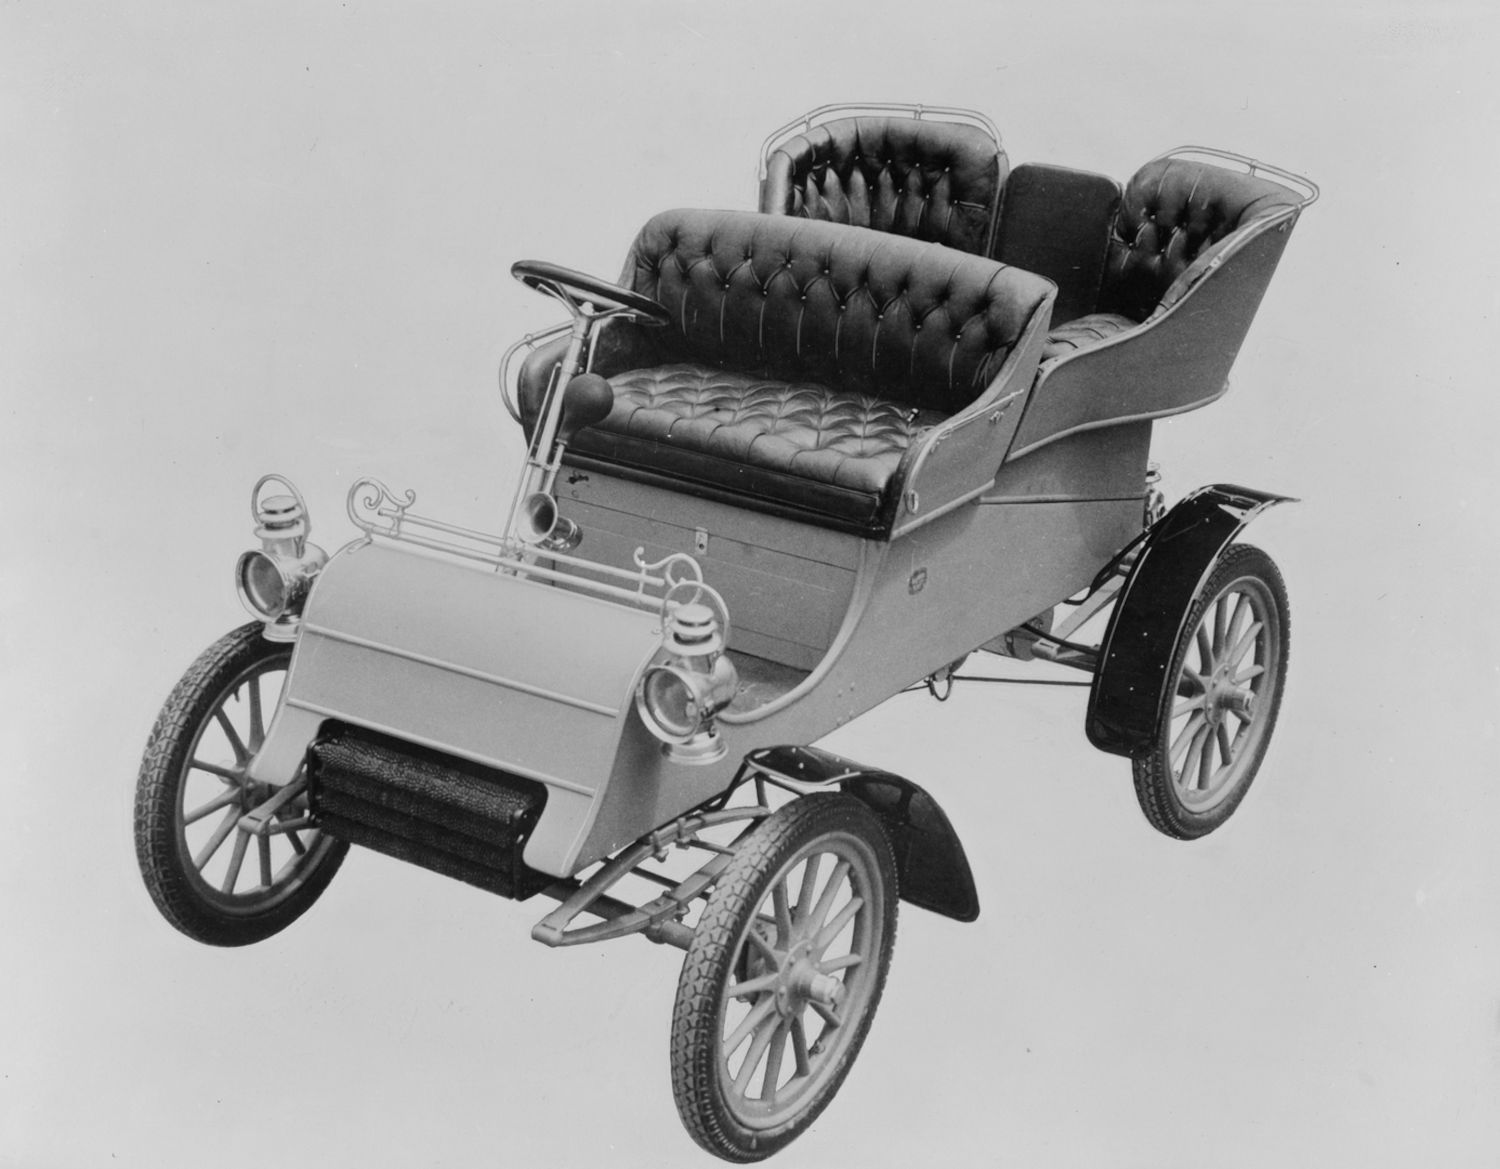 The Ford Motor Company first edition, a 1903 Ford Model A